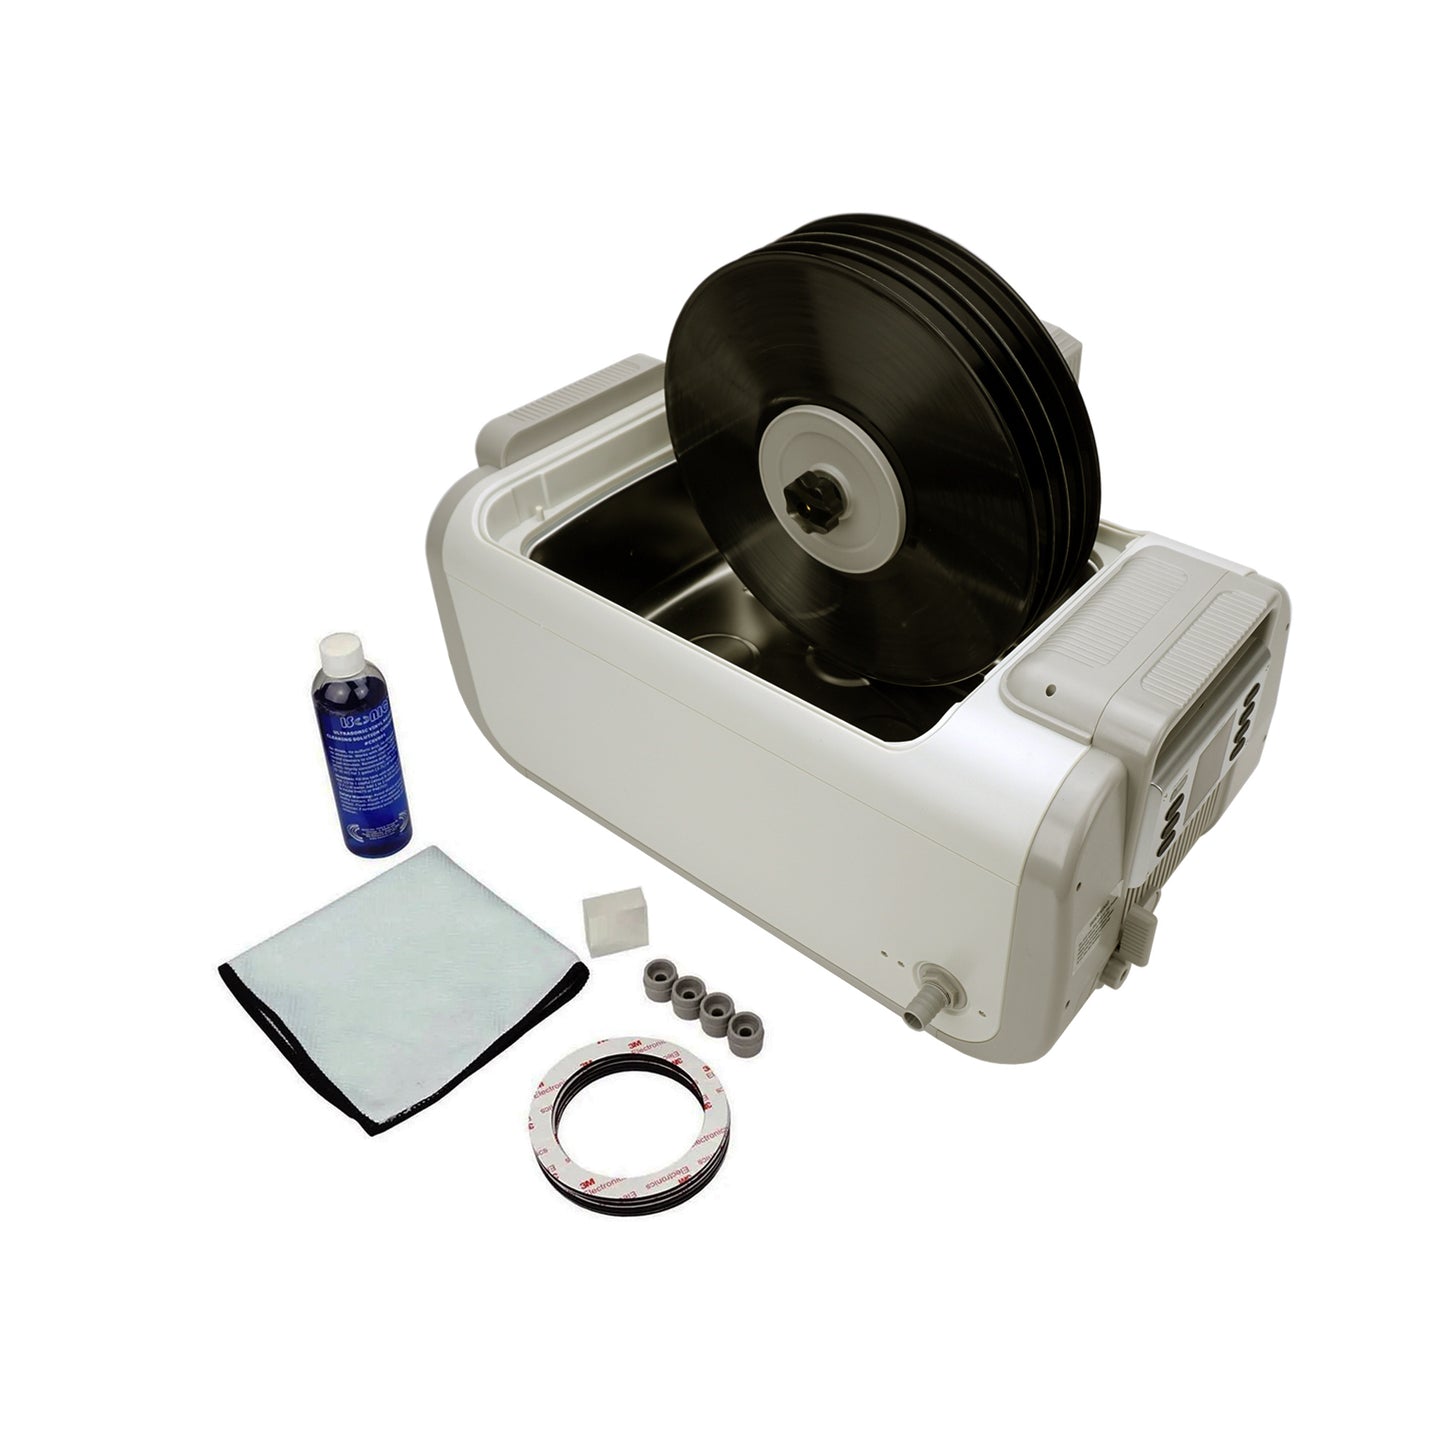 P4875II+MVR5 (almost new) | iSonic® Ultrasonic Vinyl Record Cleaner for 5-LPs, 2Gal/7.5L with heaters, Free Shipping!